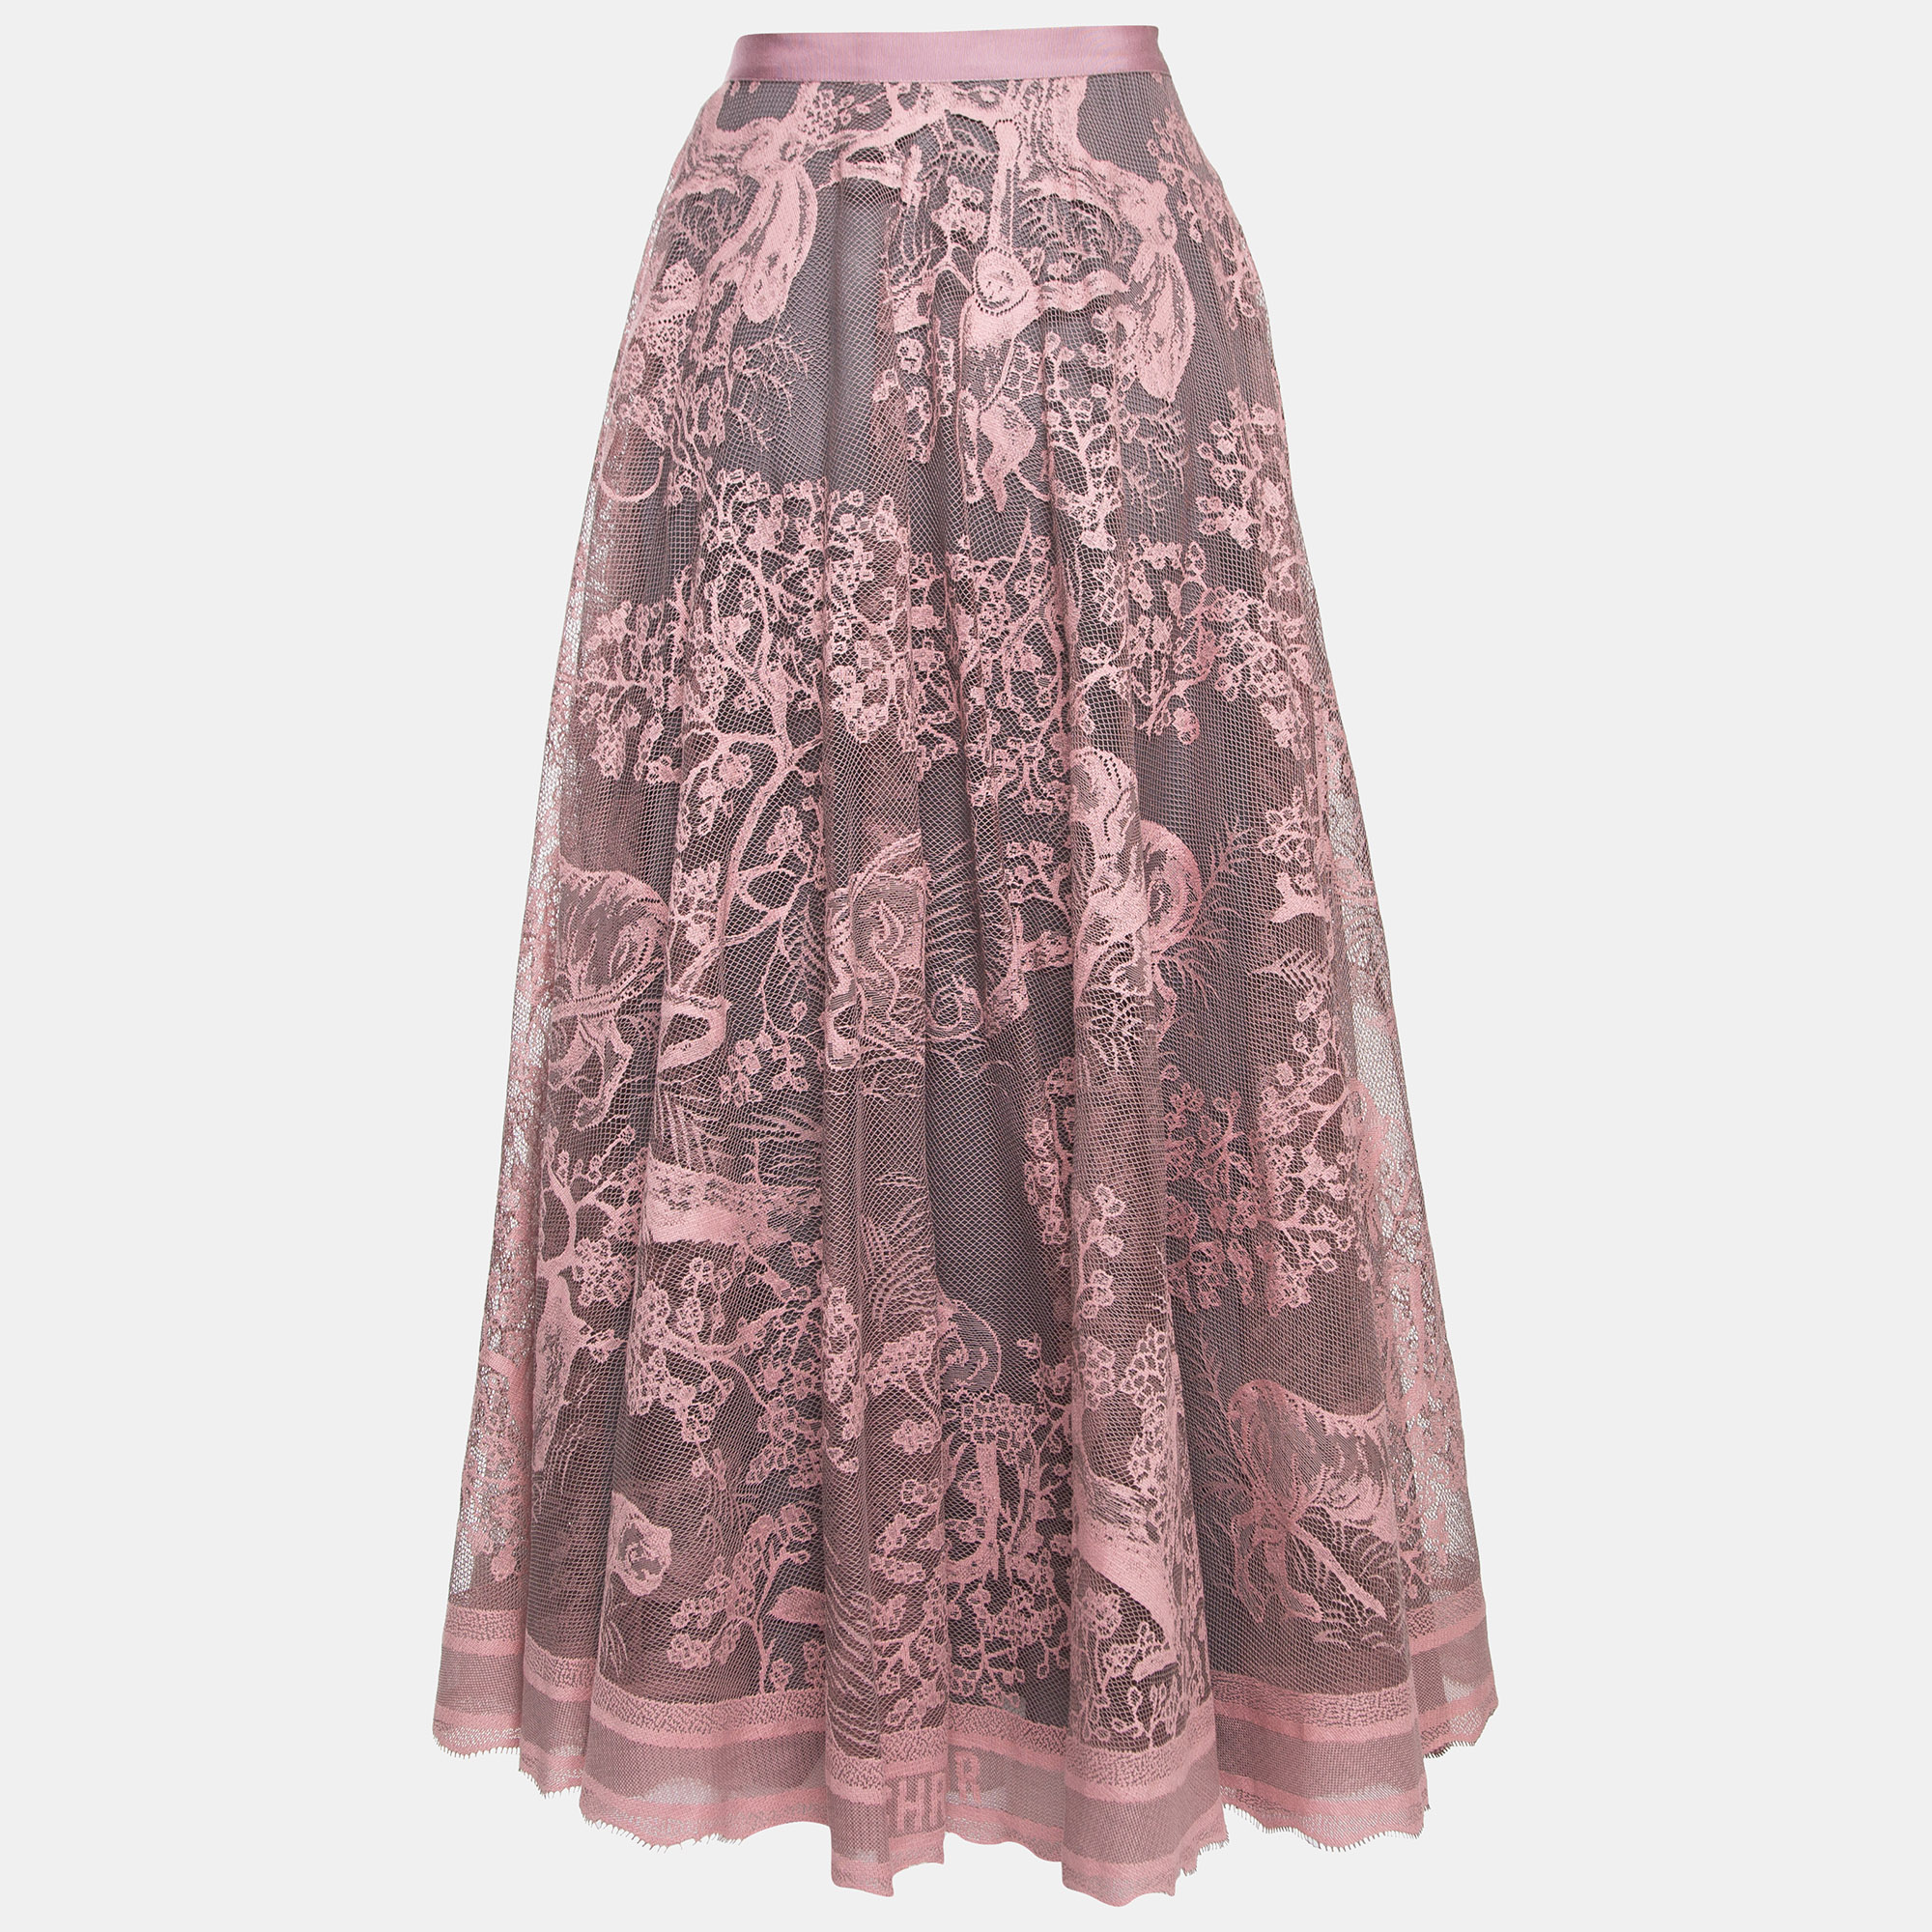 

Dior Pink Patterned Lace Dioriviera Midi Skirt